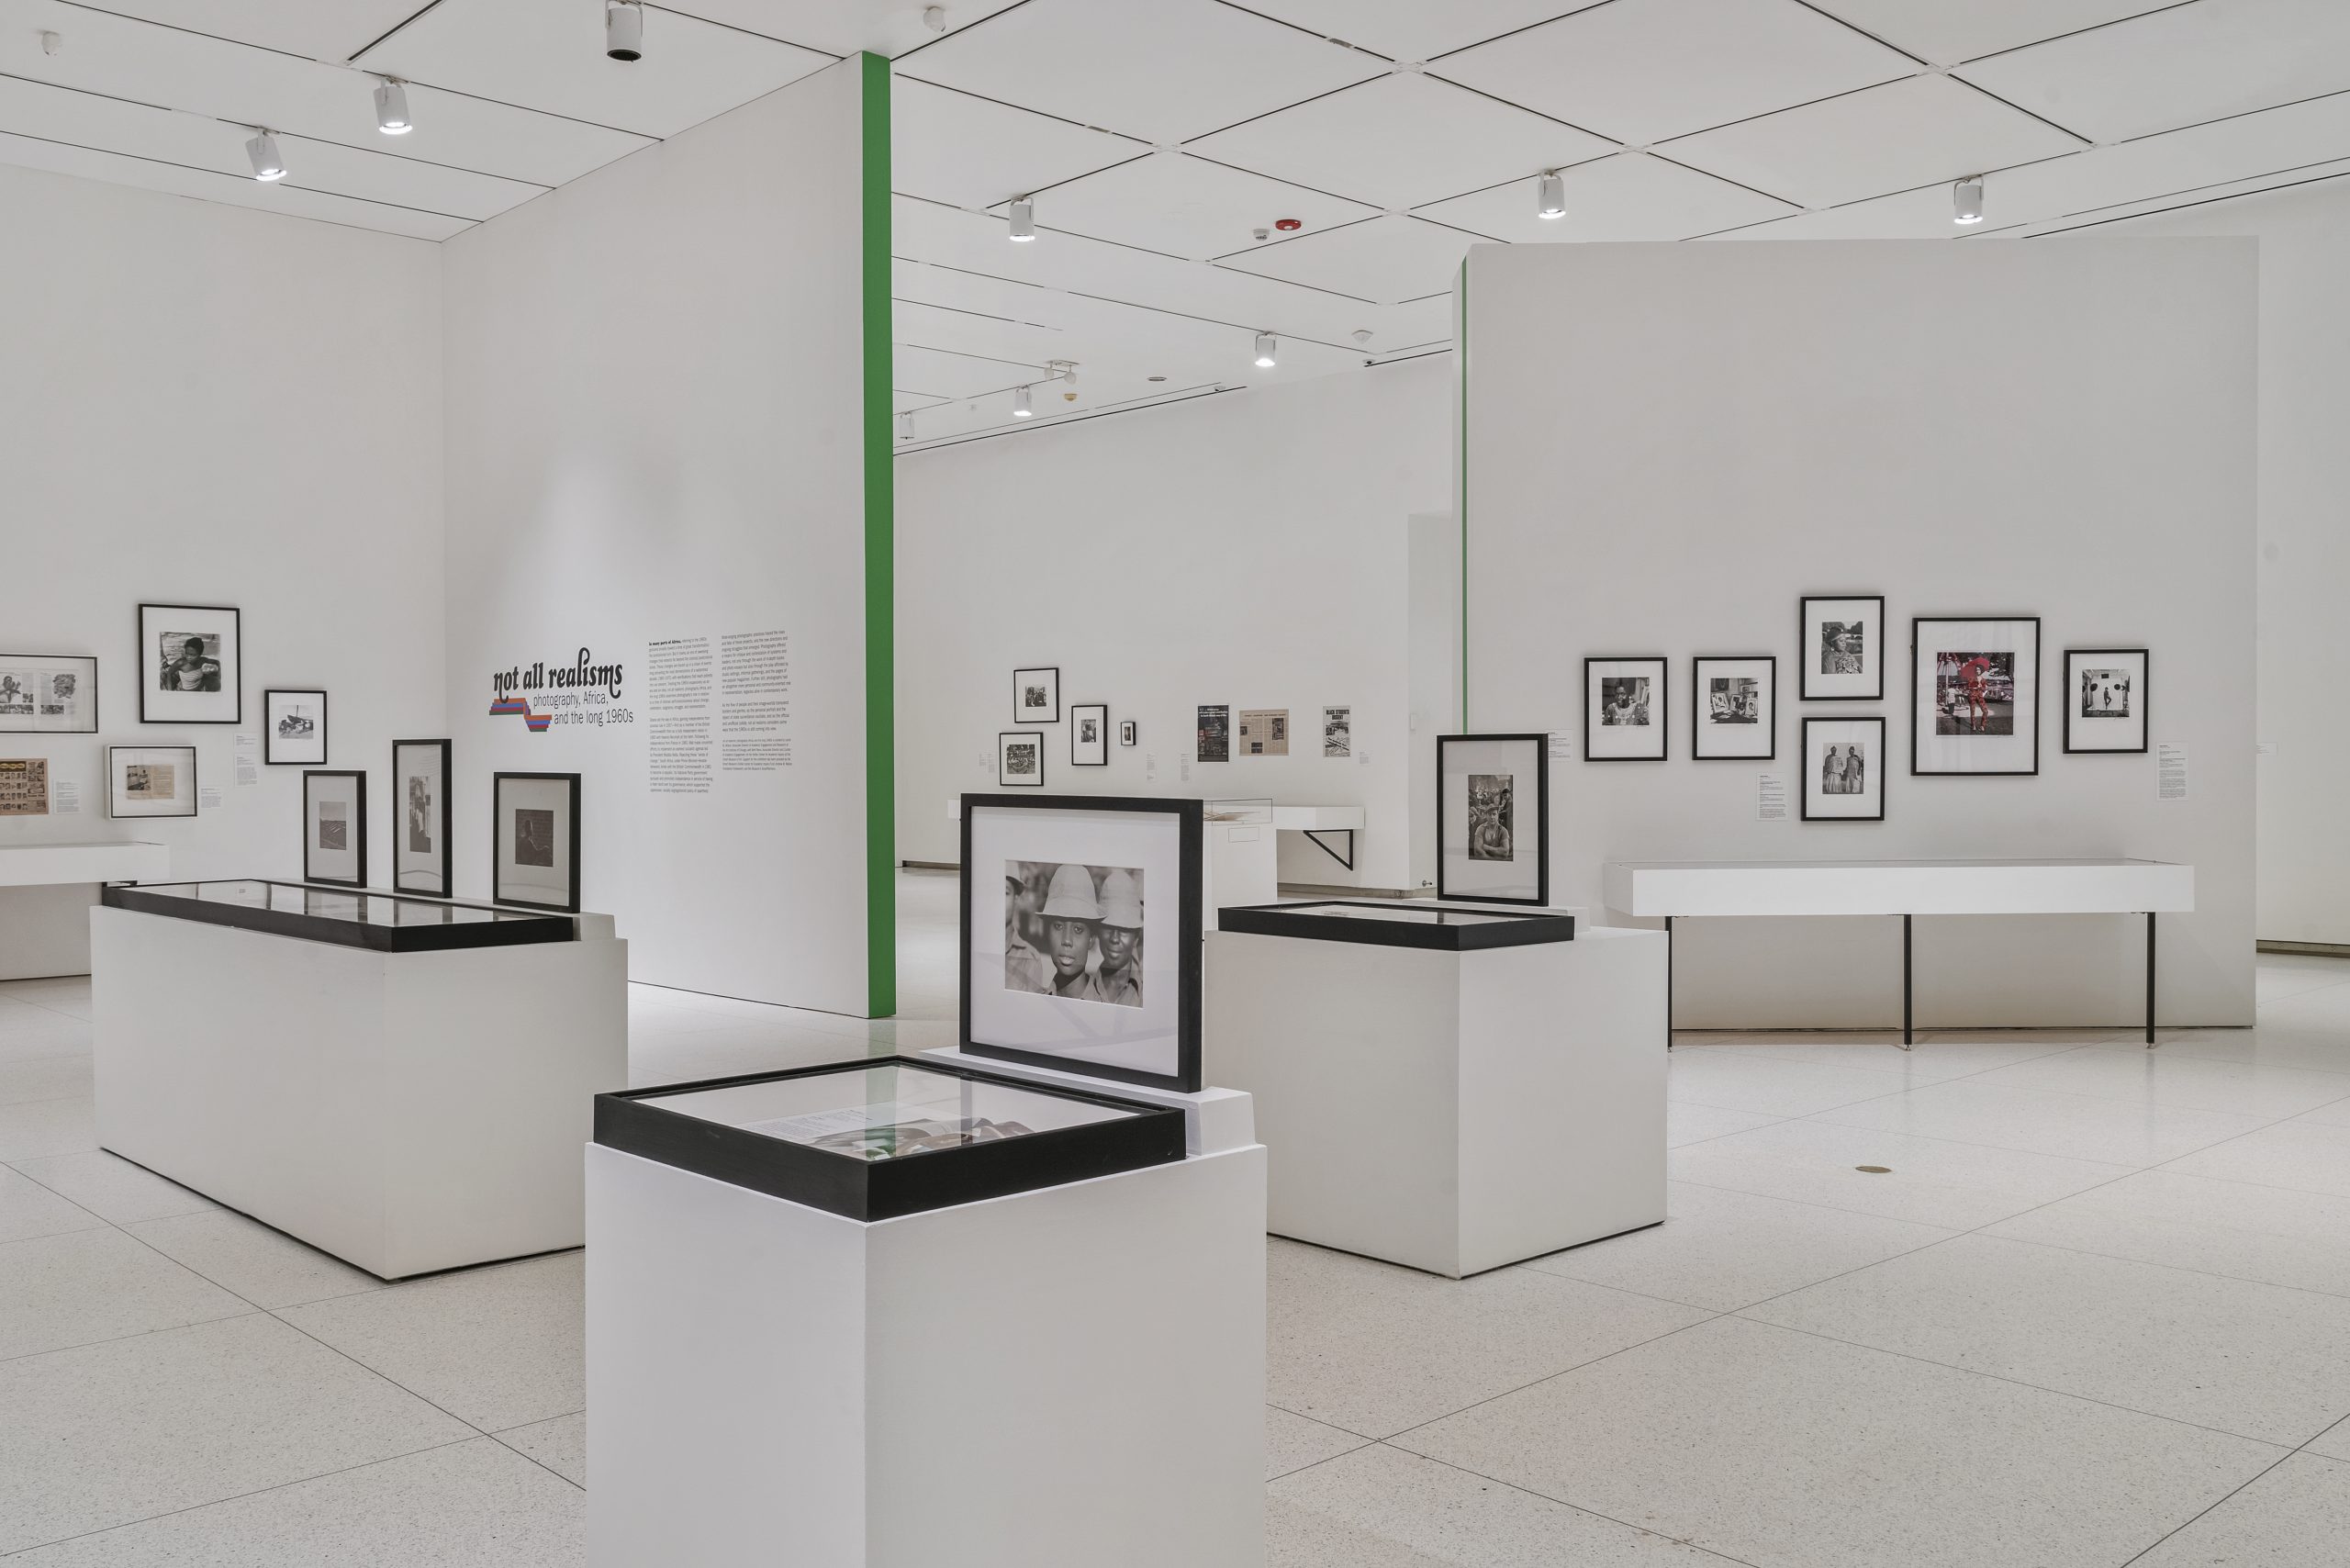 Image: Installation view of not all realisms with overlapping pedestals and walls featuring the show’s artwork.